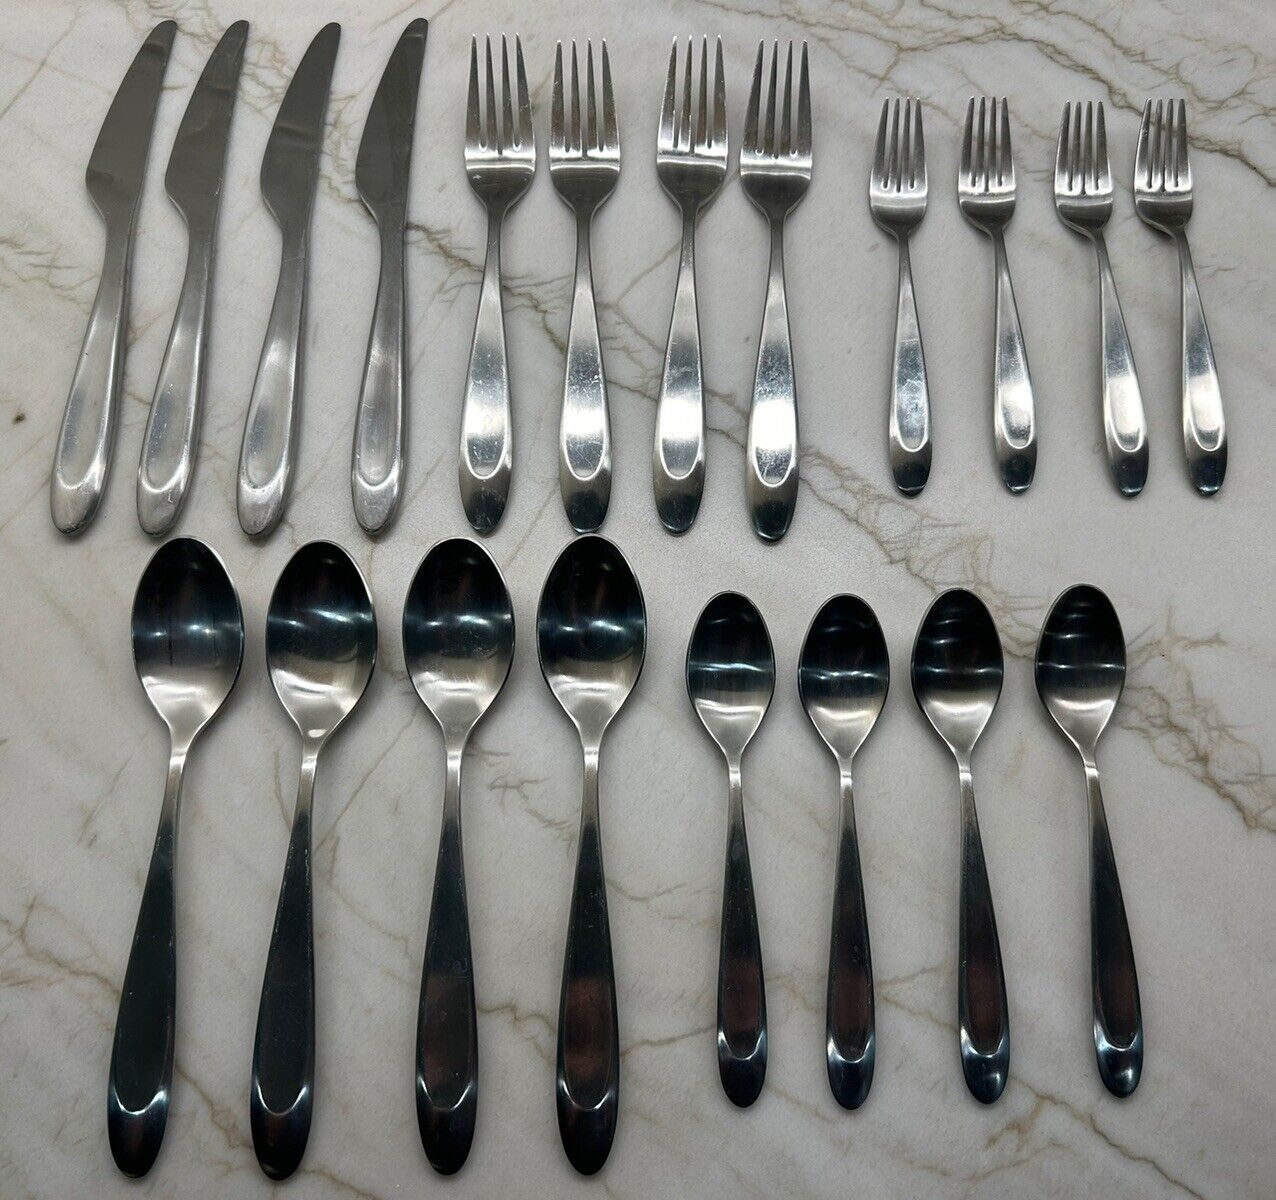 Gourmet Settings STAND BY Service For 4 20 Pc Lot flatware spoons Forks knives